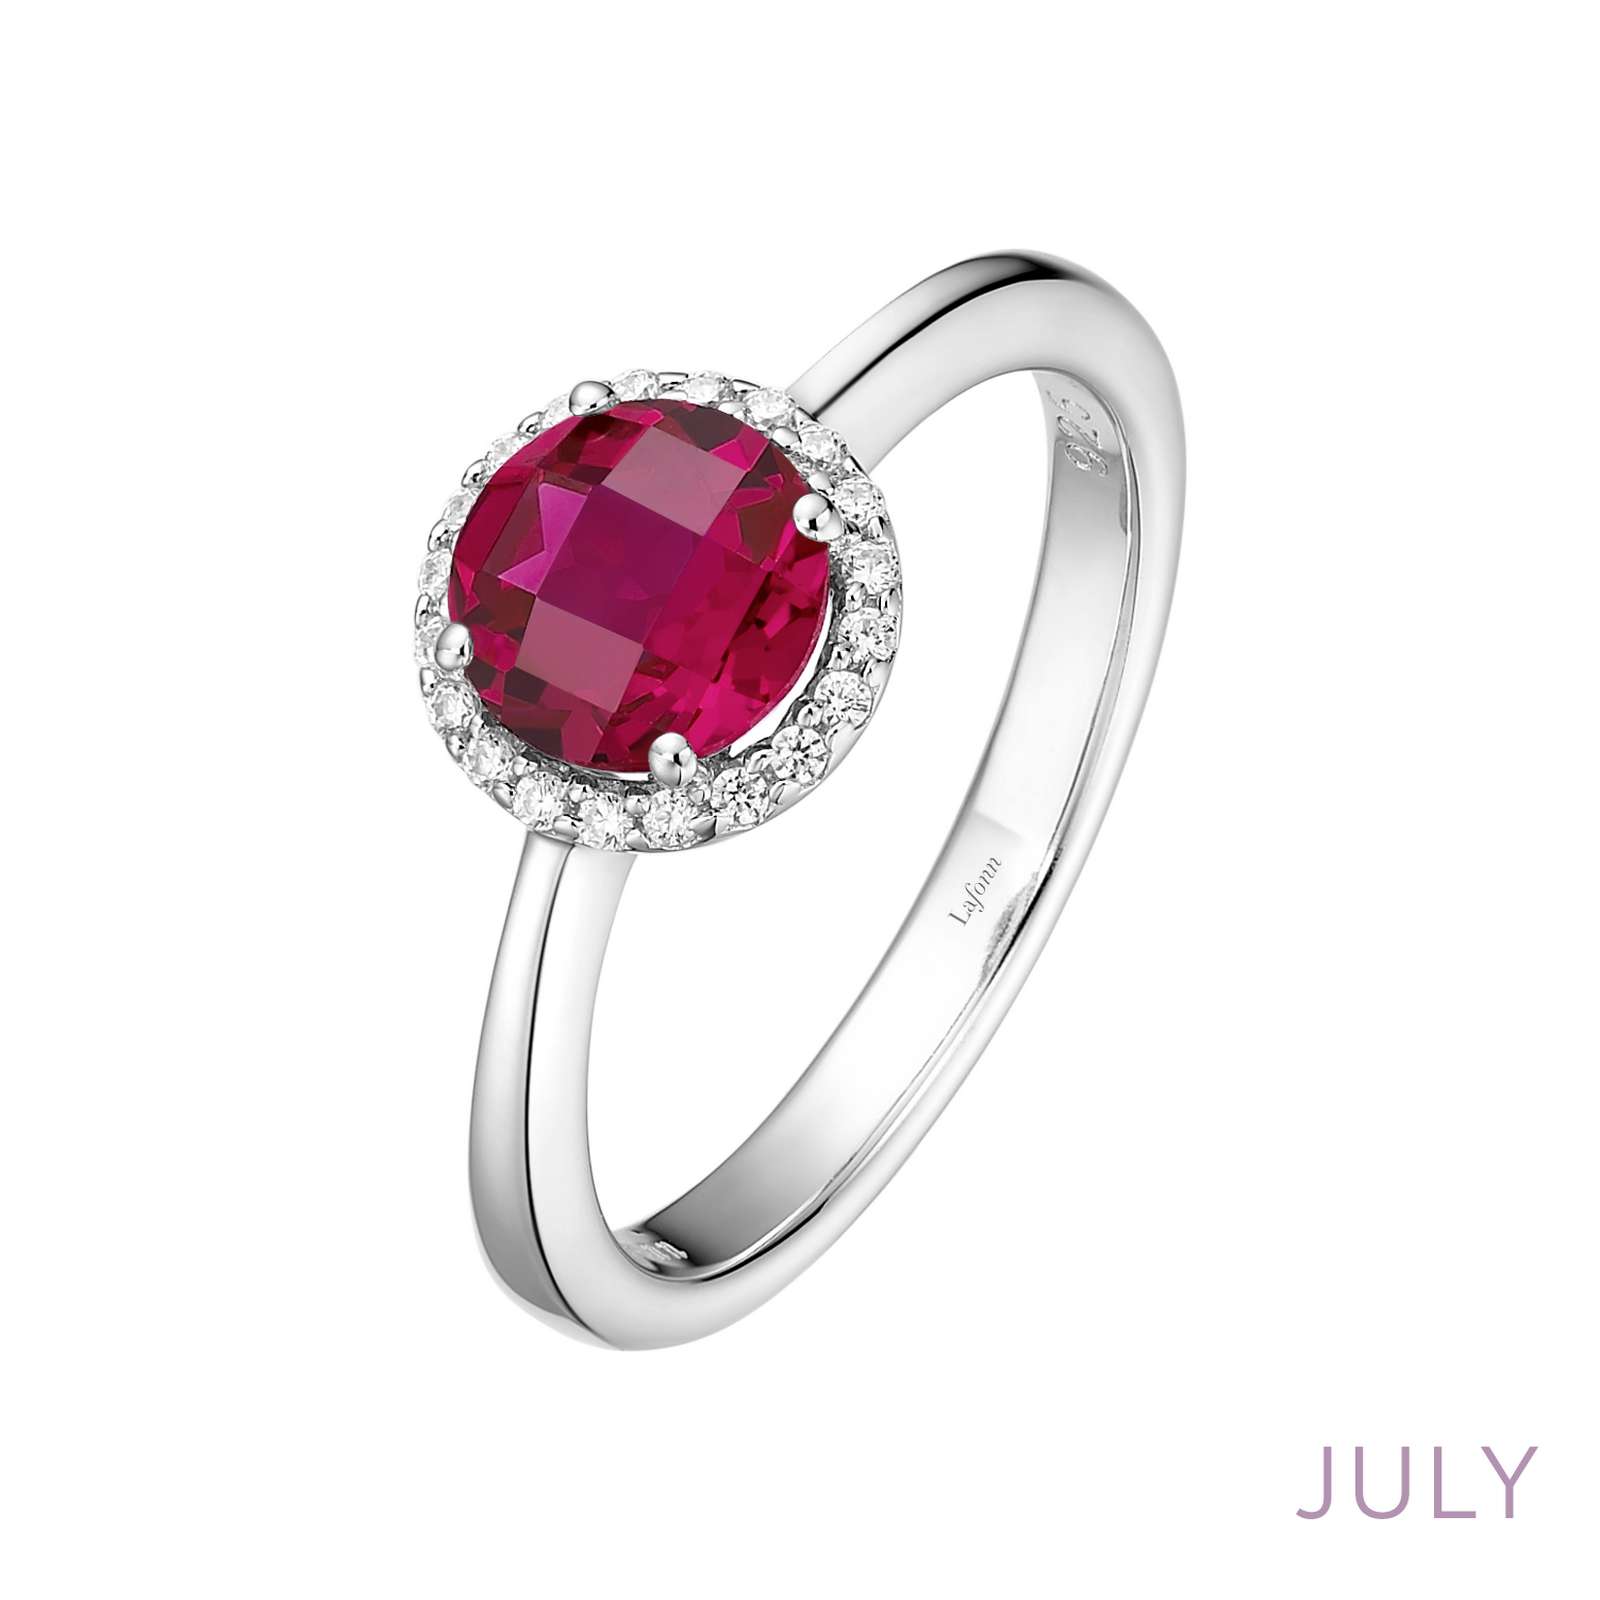 July Birthstone Ring Griner Jewelry Co. Moultrie, GA